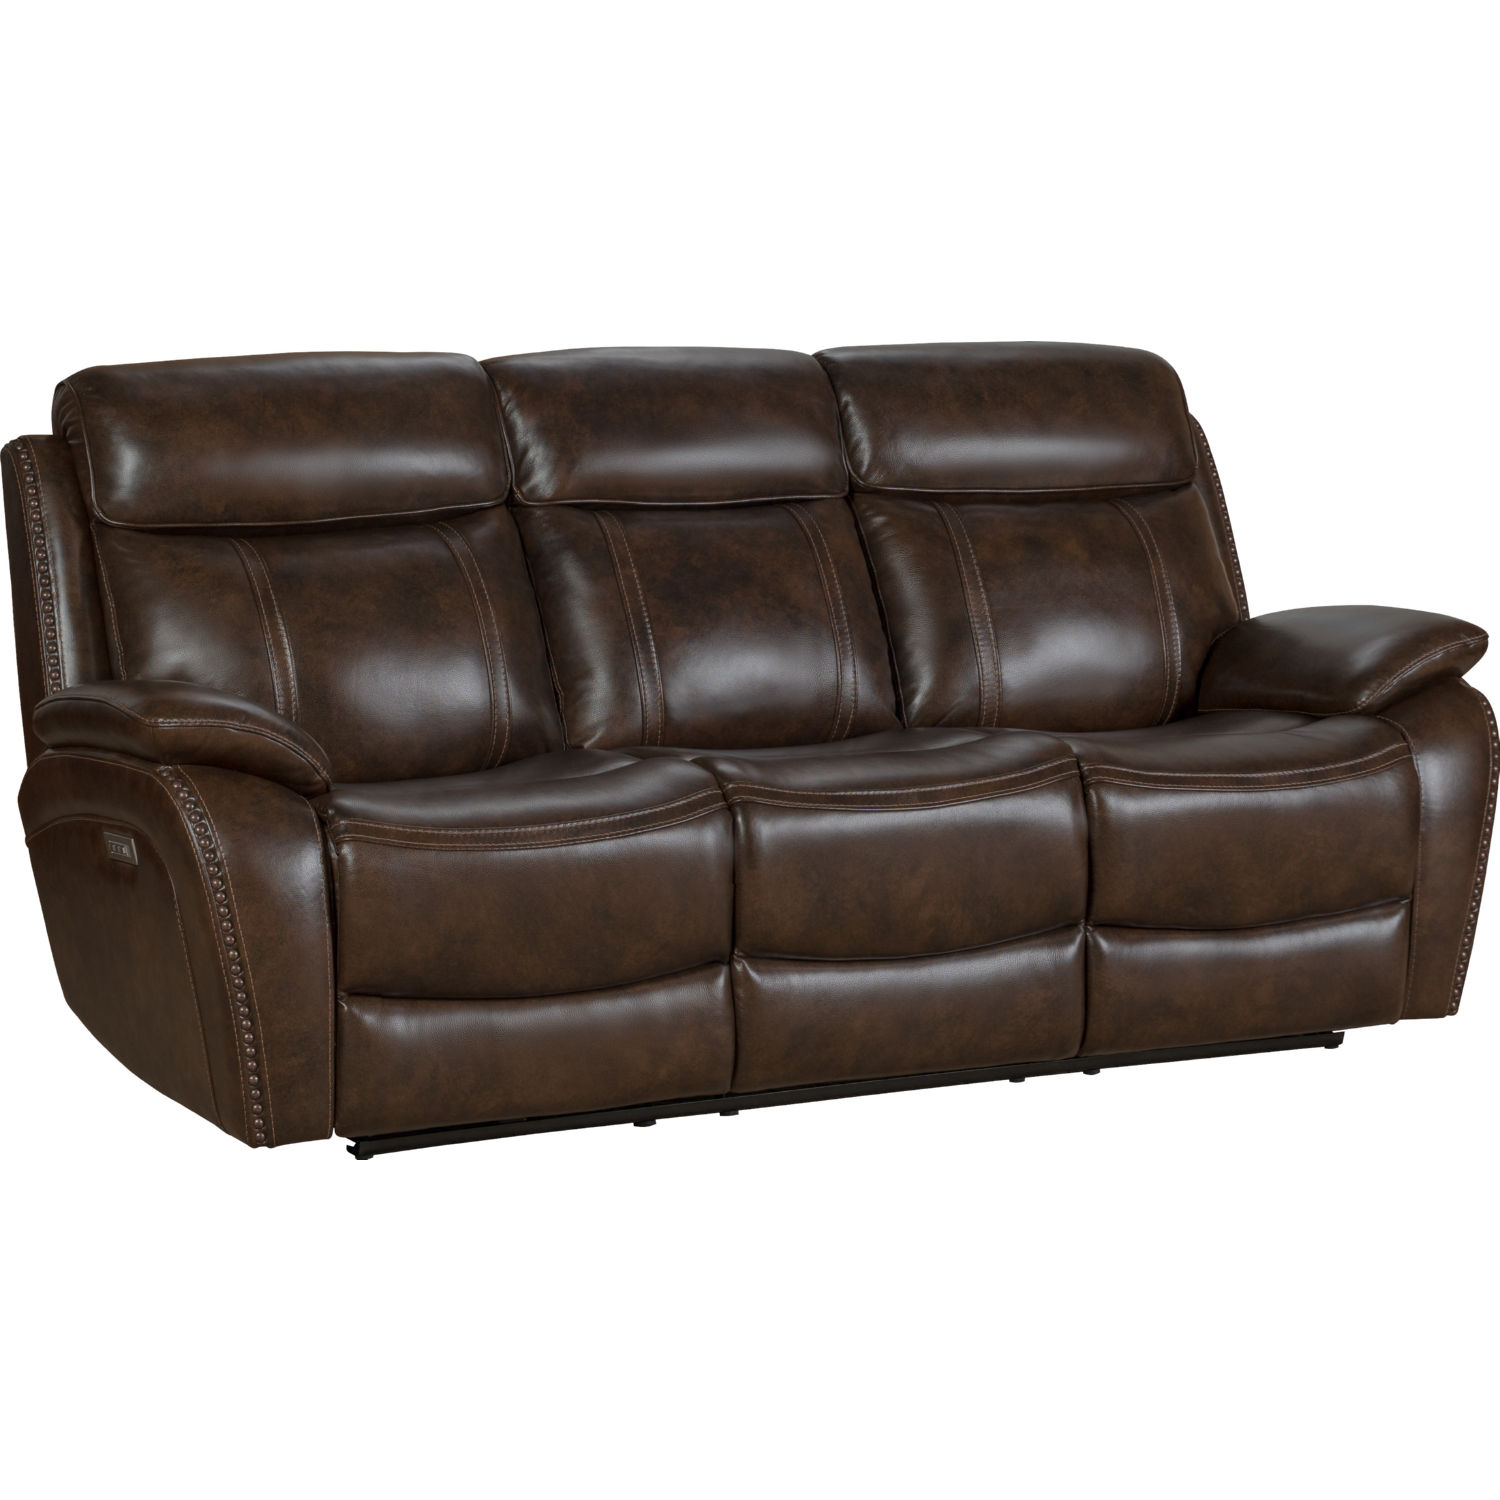 Sandover Power Reclining Sofa, Chocolate Leather Recliner